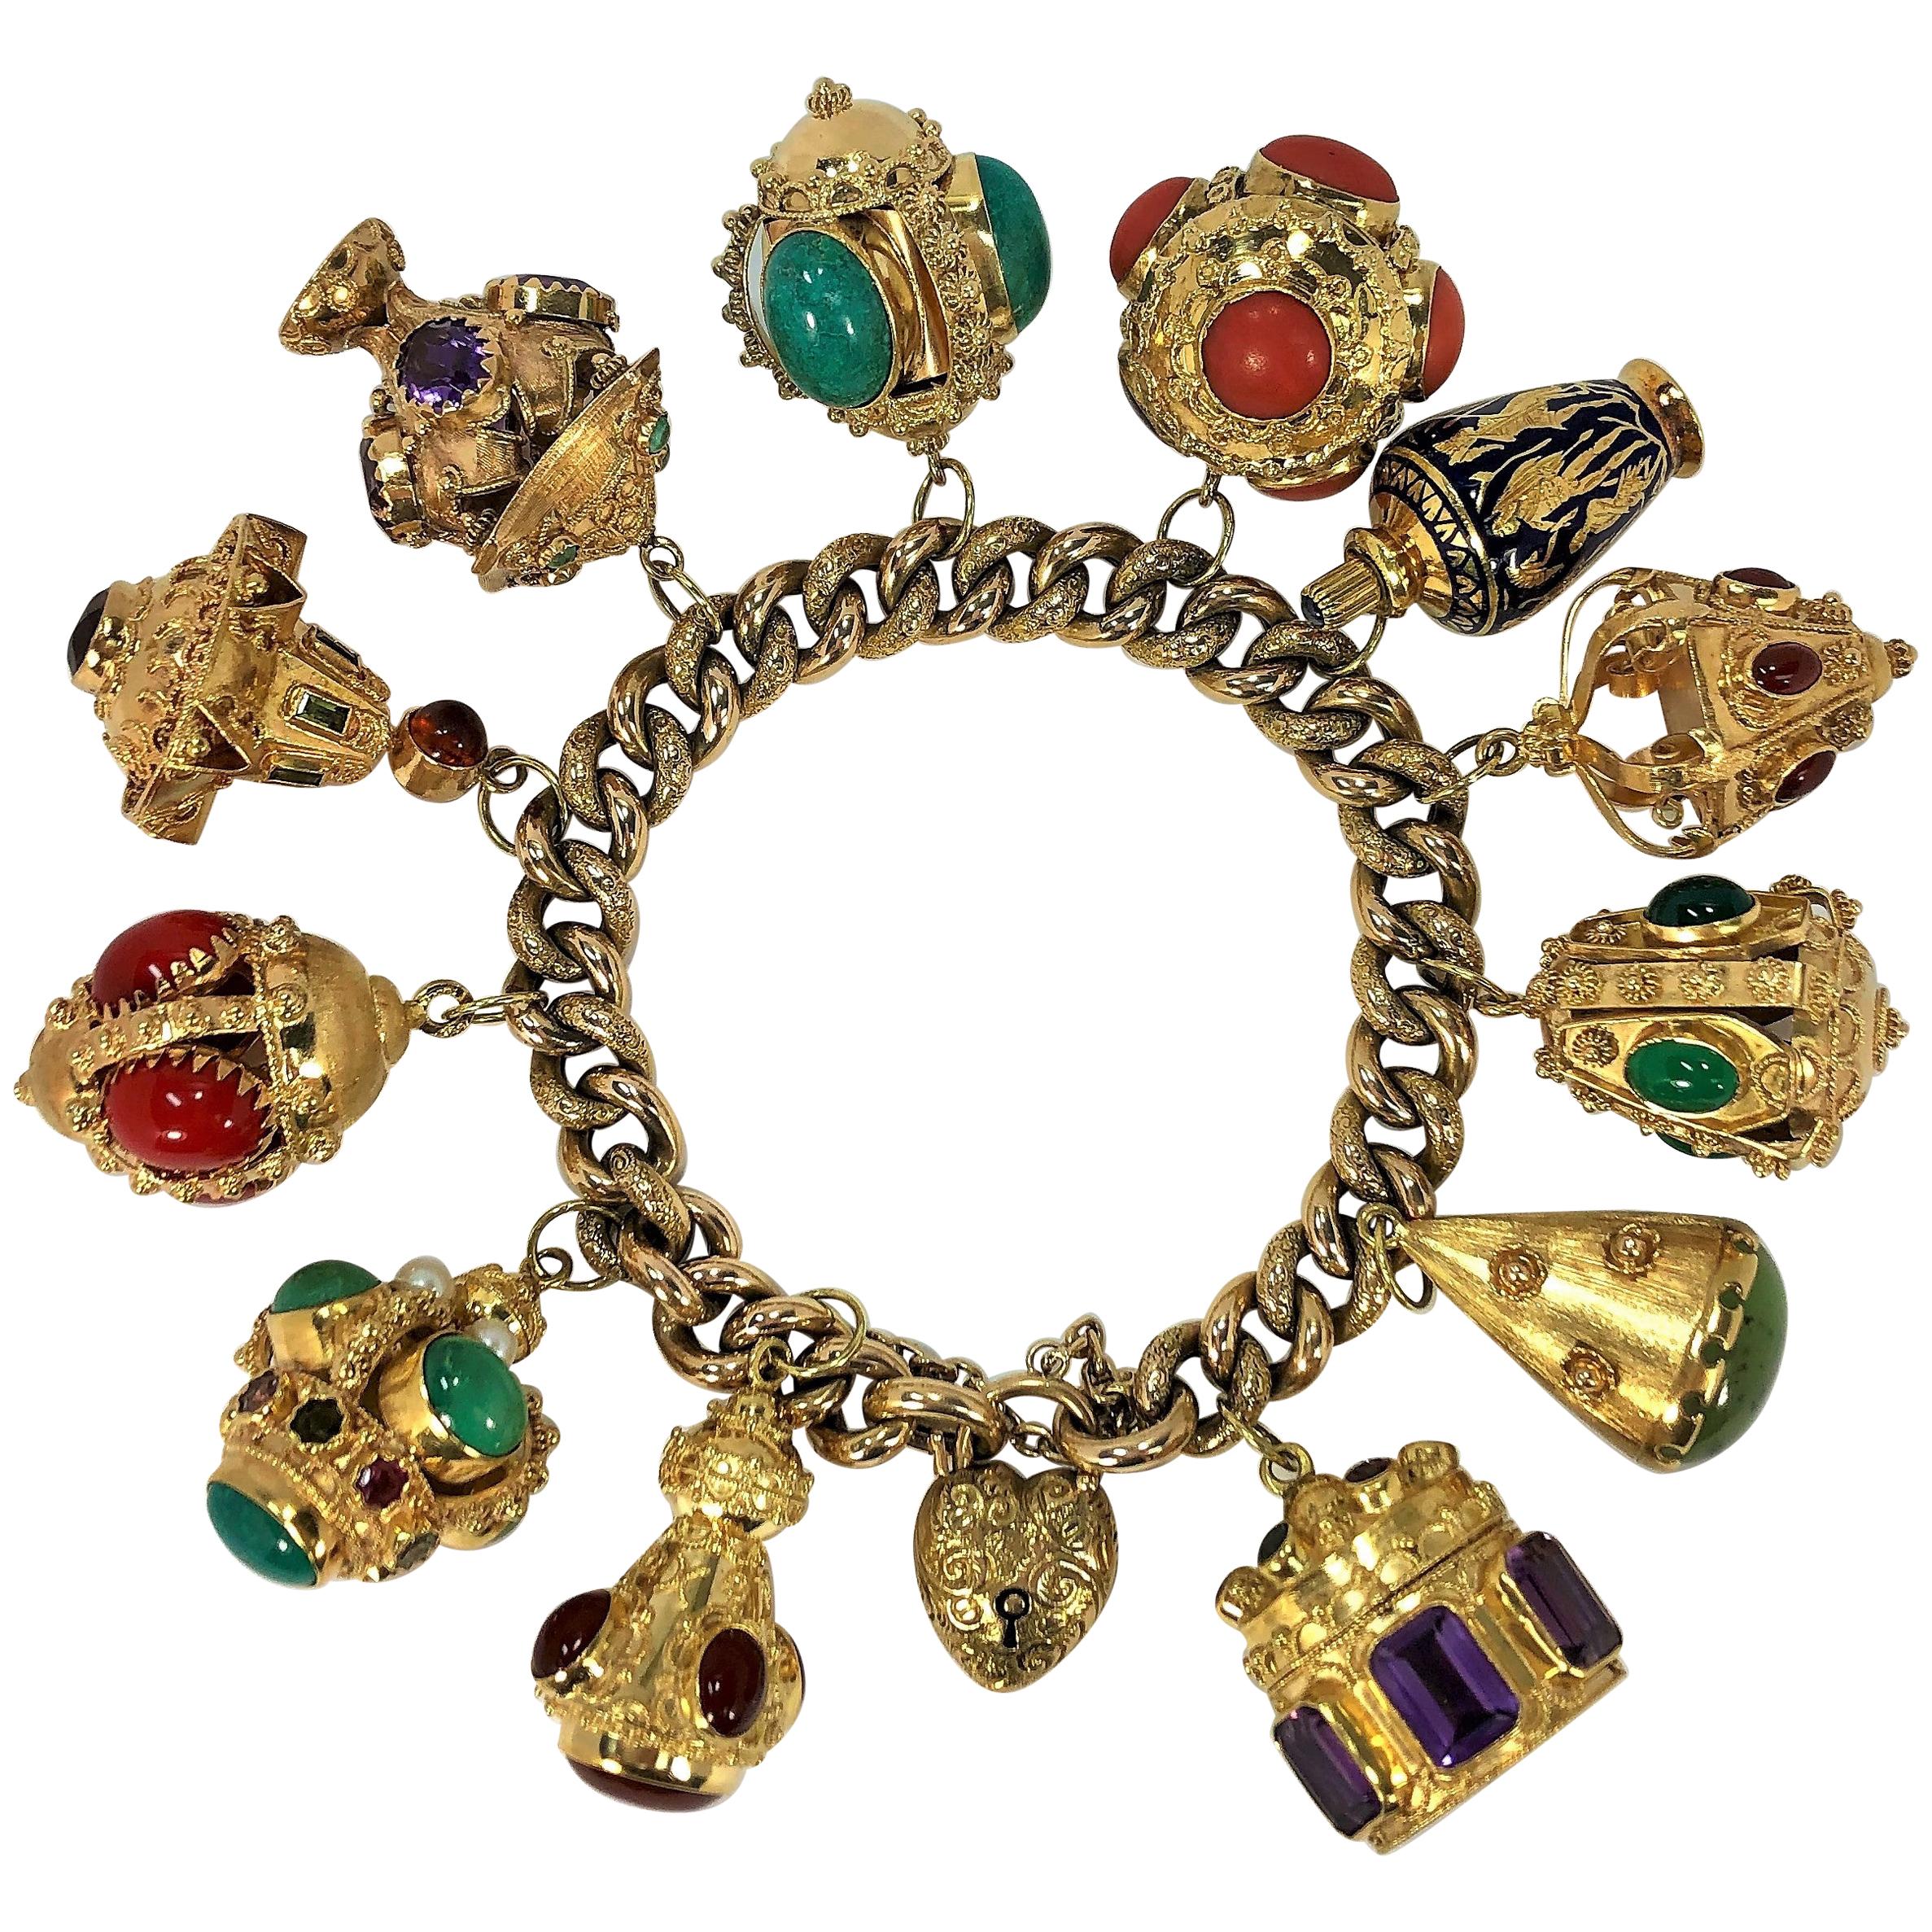 Midcentury Italian Gold Etruscan Revival Charm Bracelet-12 Assorted Color Charms